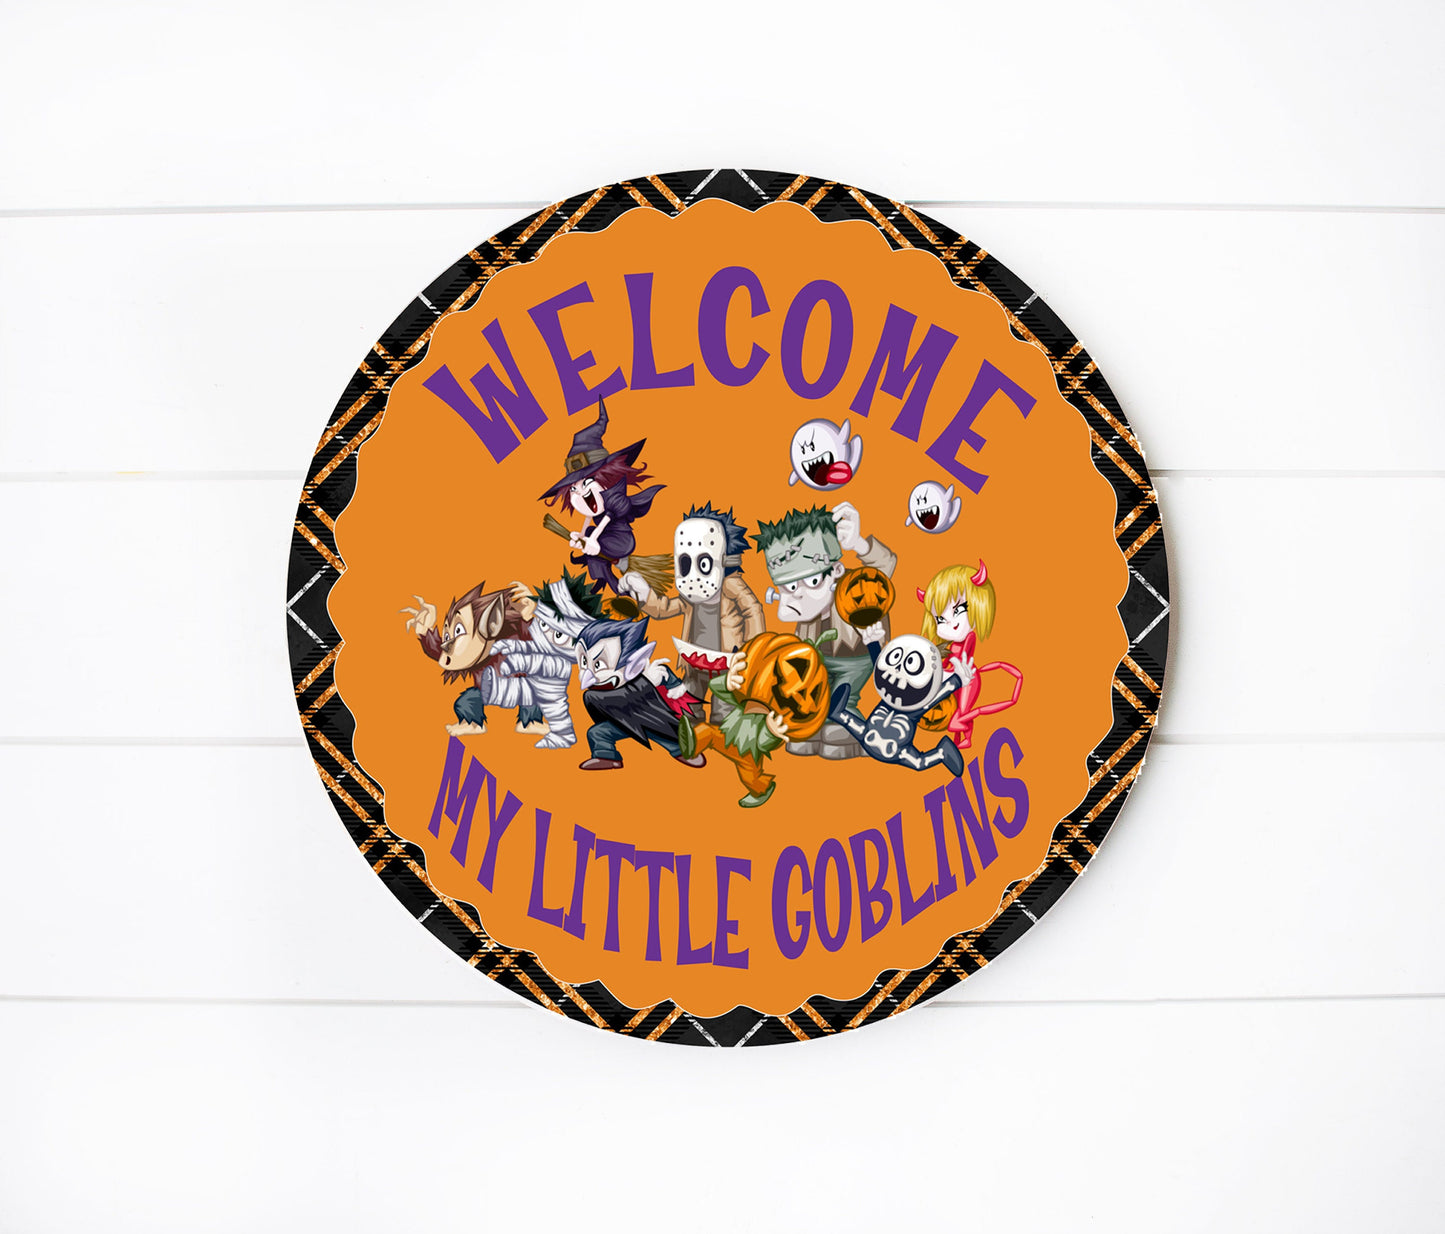 Welcome My Little Gobblins Halloween Round Printed Handmade Wood Sign